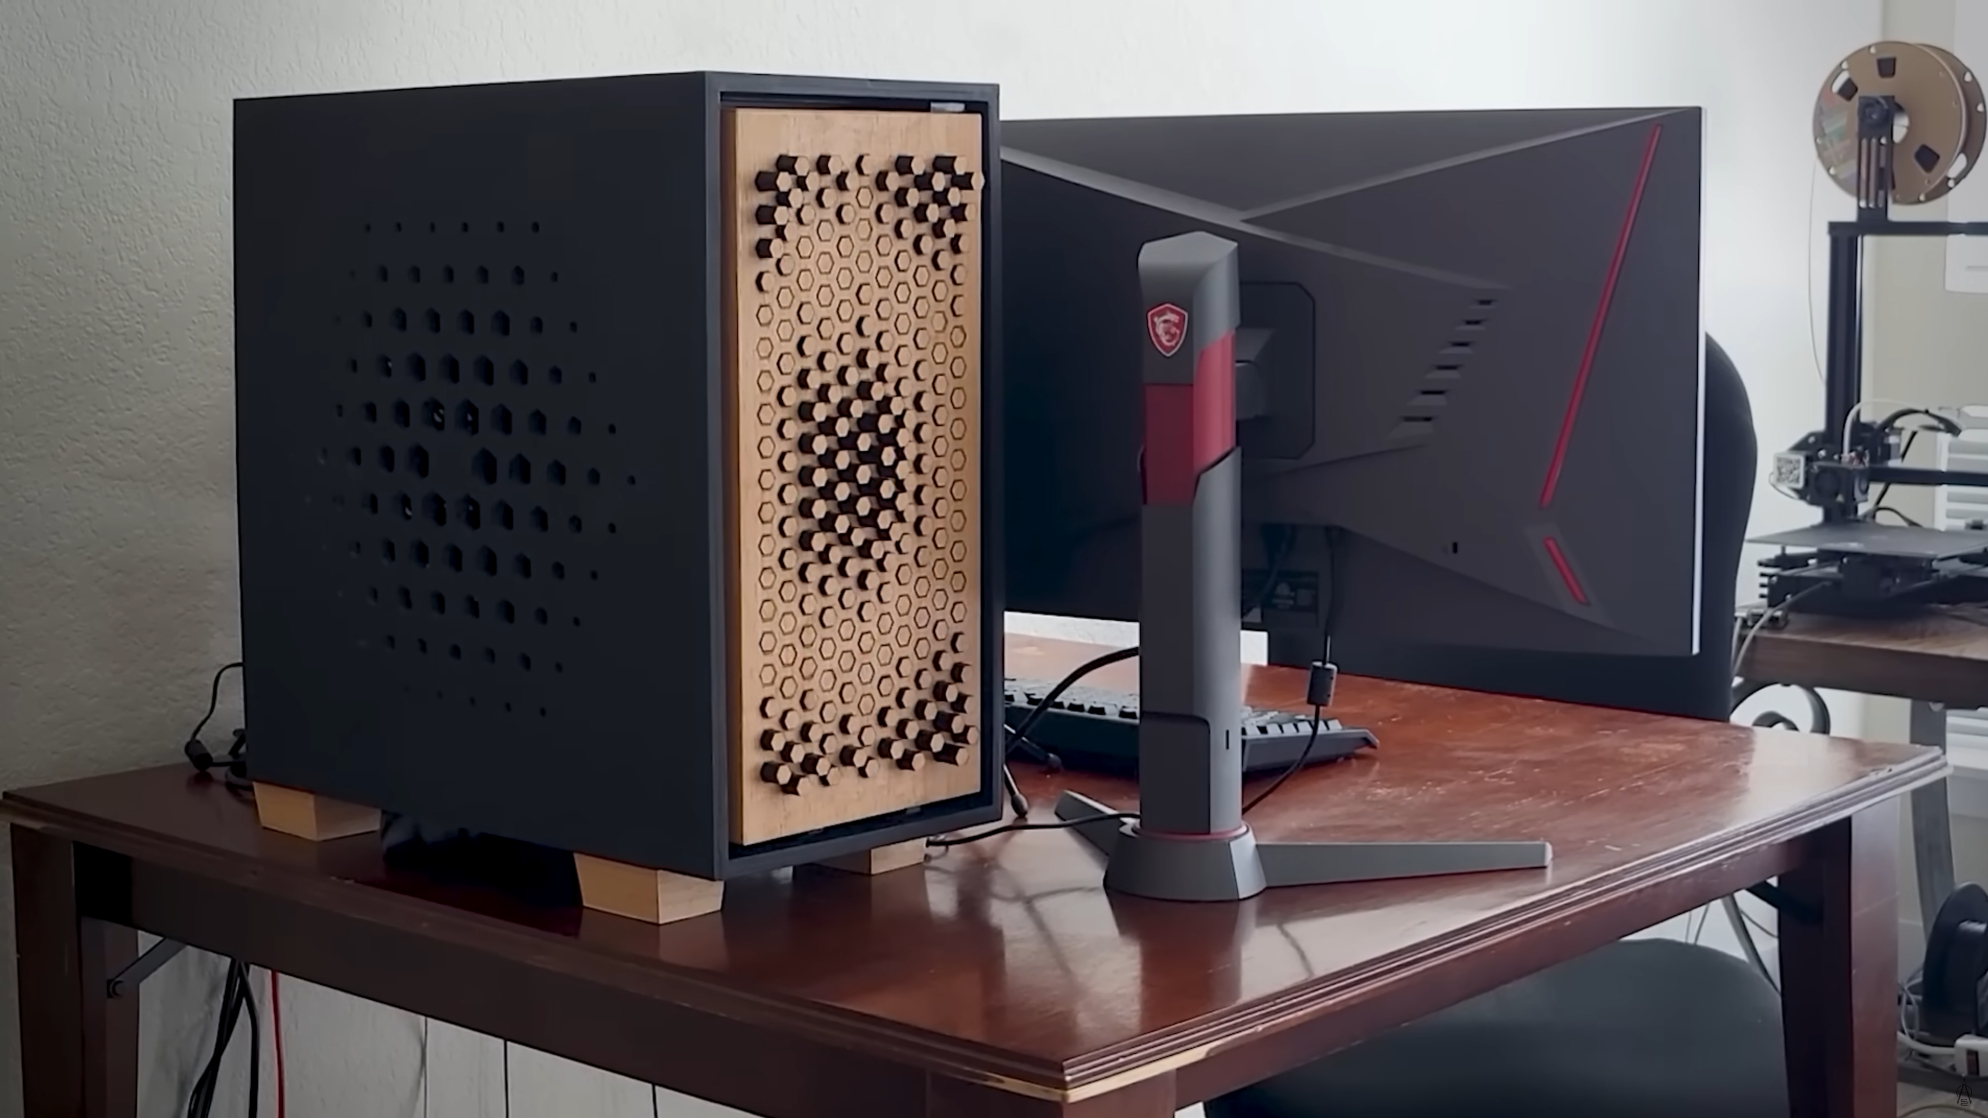  This kinetic PC case puts my RGB chassis to shame and I'm totally okay with that 